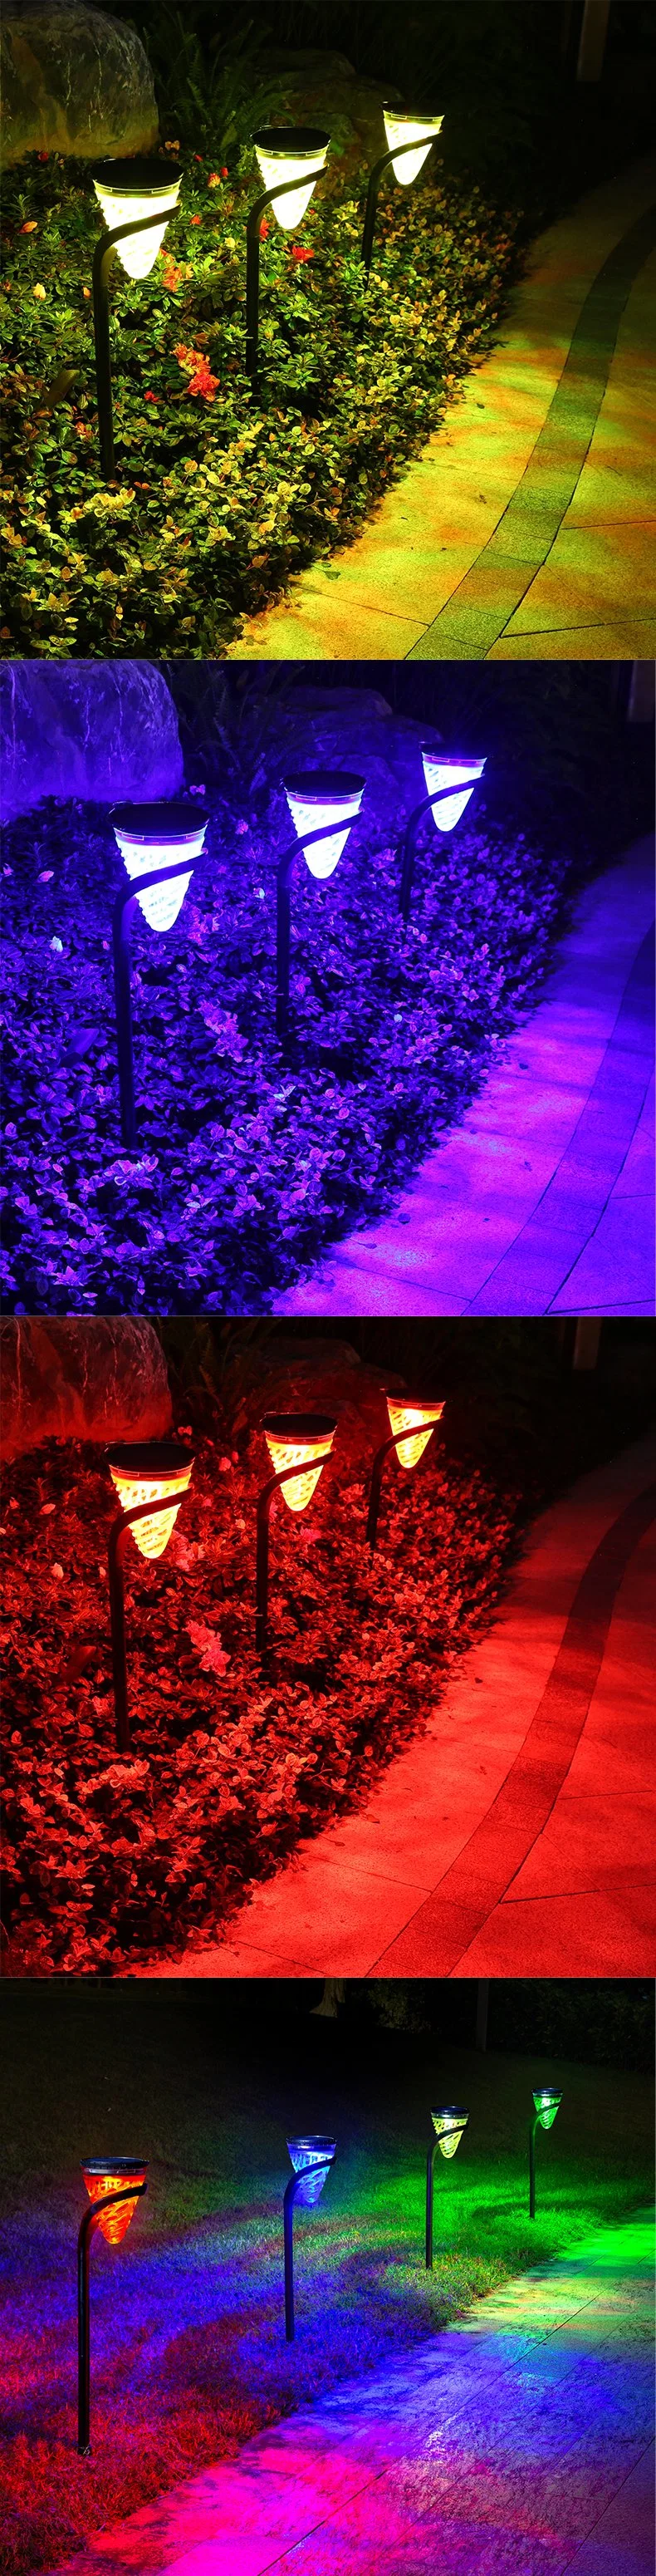 Super Bright Solar Lights Outdoor Waterproof 2pack, Dusk to Dawn up to 10 Hrs Solar Powered Outdoor Pathway Garden Lights Auto on/off, LED Landscape Lighting